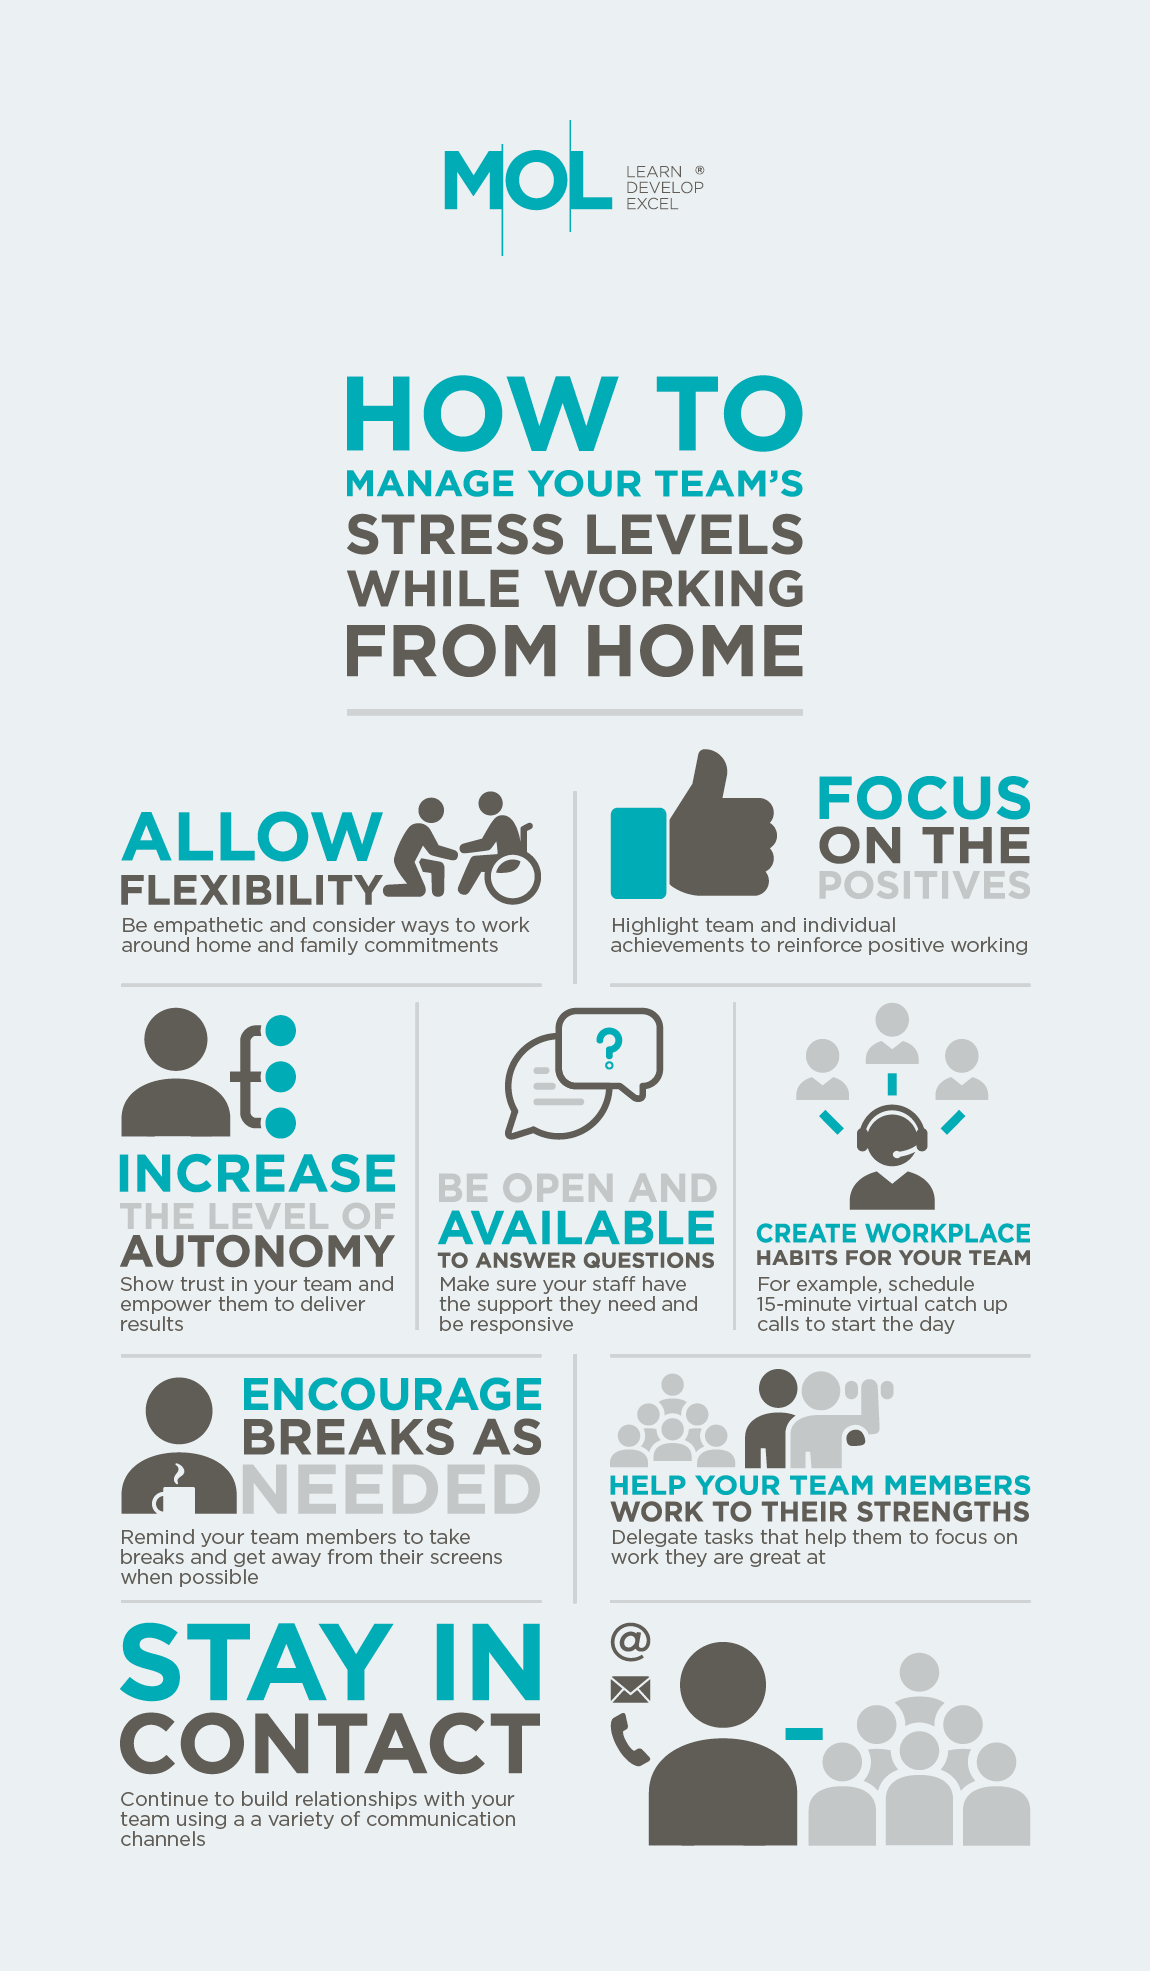 How to manage your team's stress levels while working from home infographic